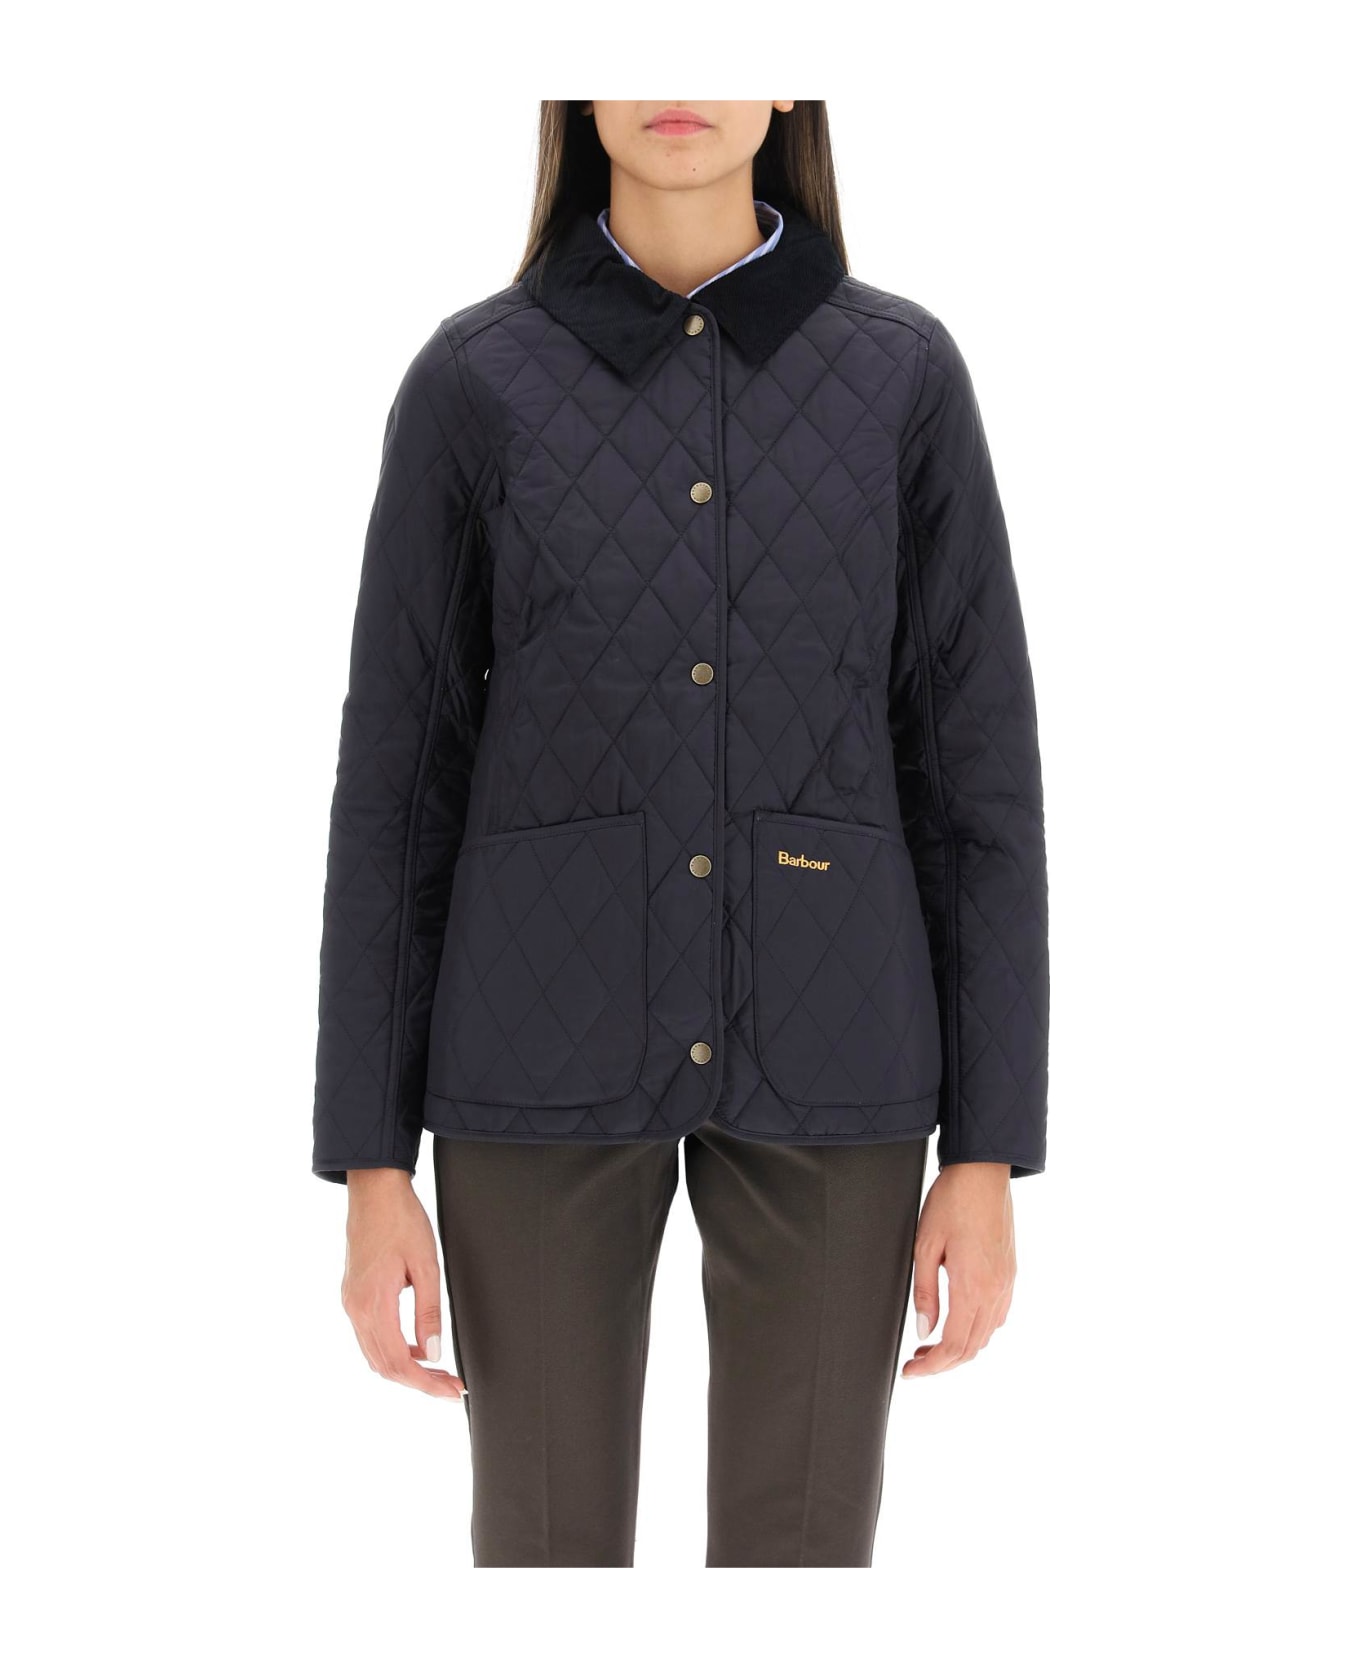 Barbour Annandale Diamond Quilted Jacket - NAVY (Blue)